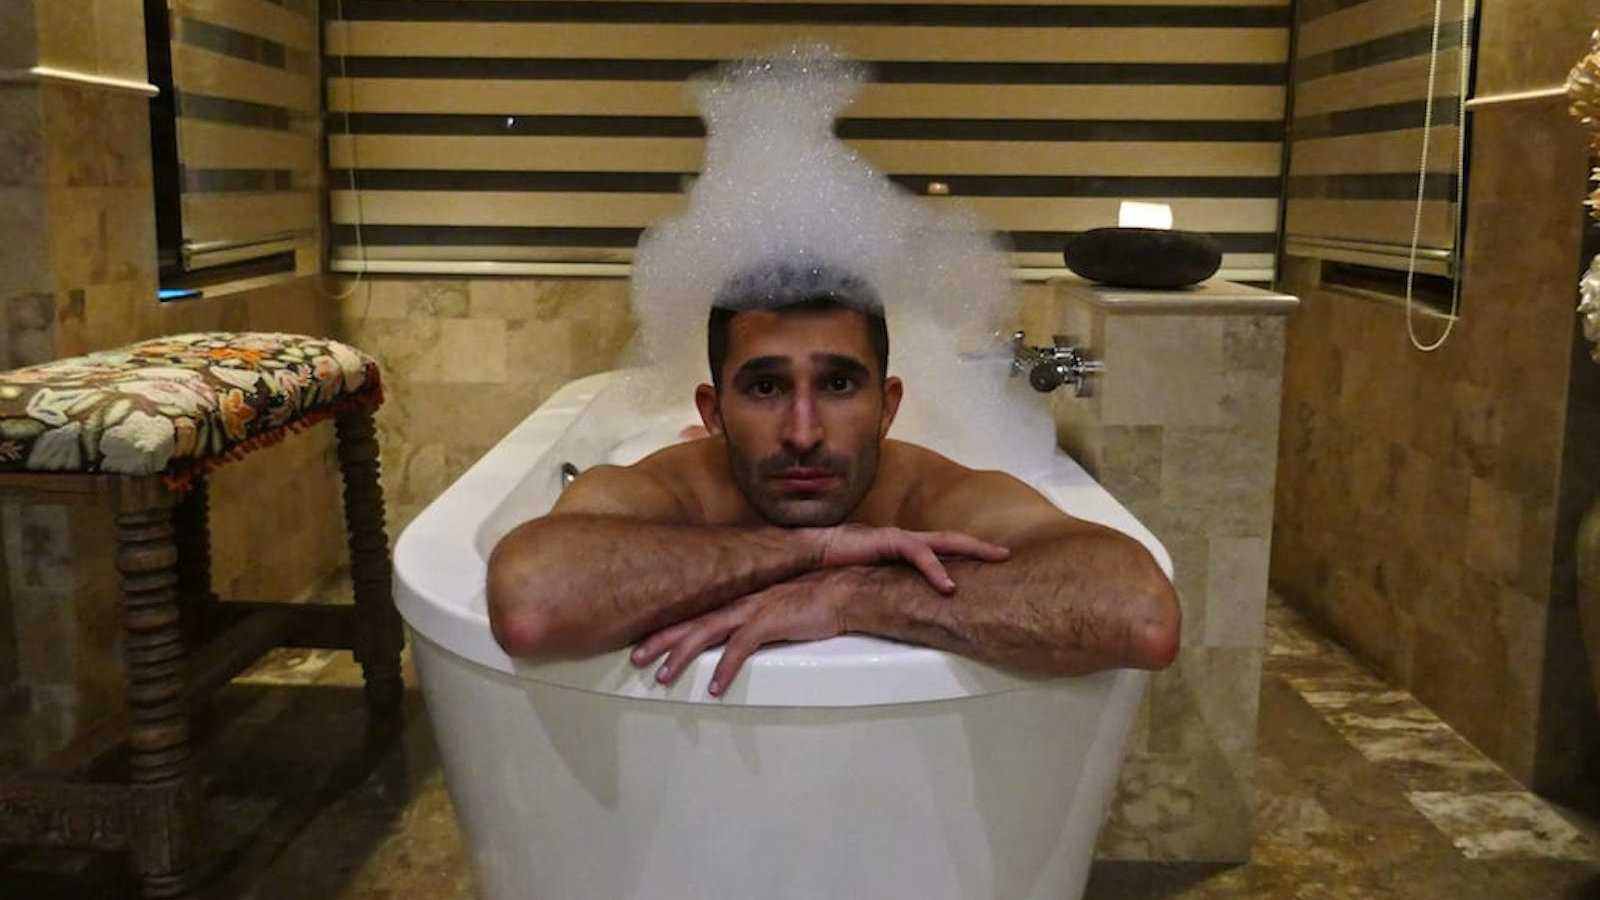 Stefan's first gay experience involved a bathtub and he's never lost his love for the tub!